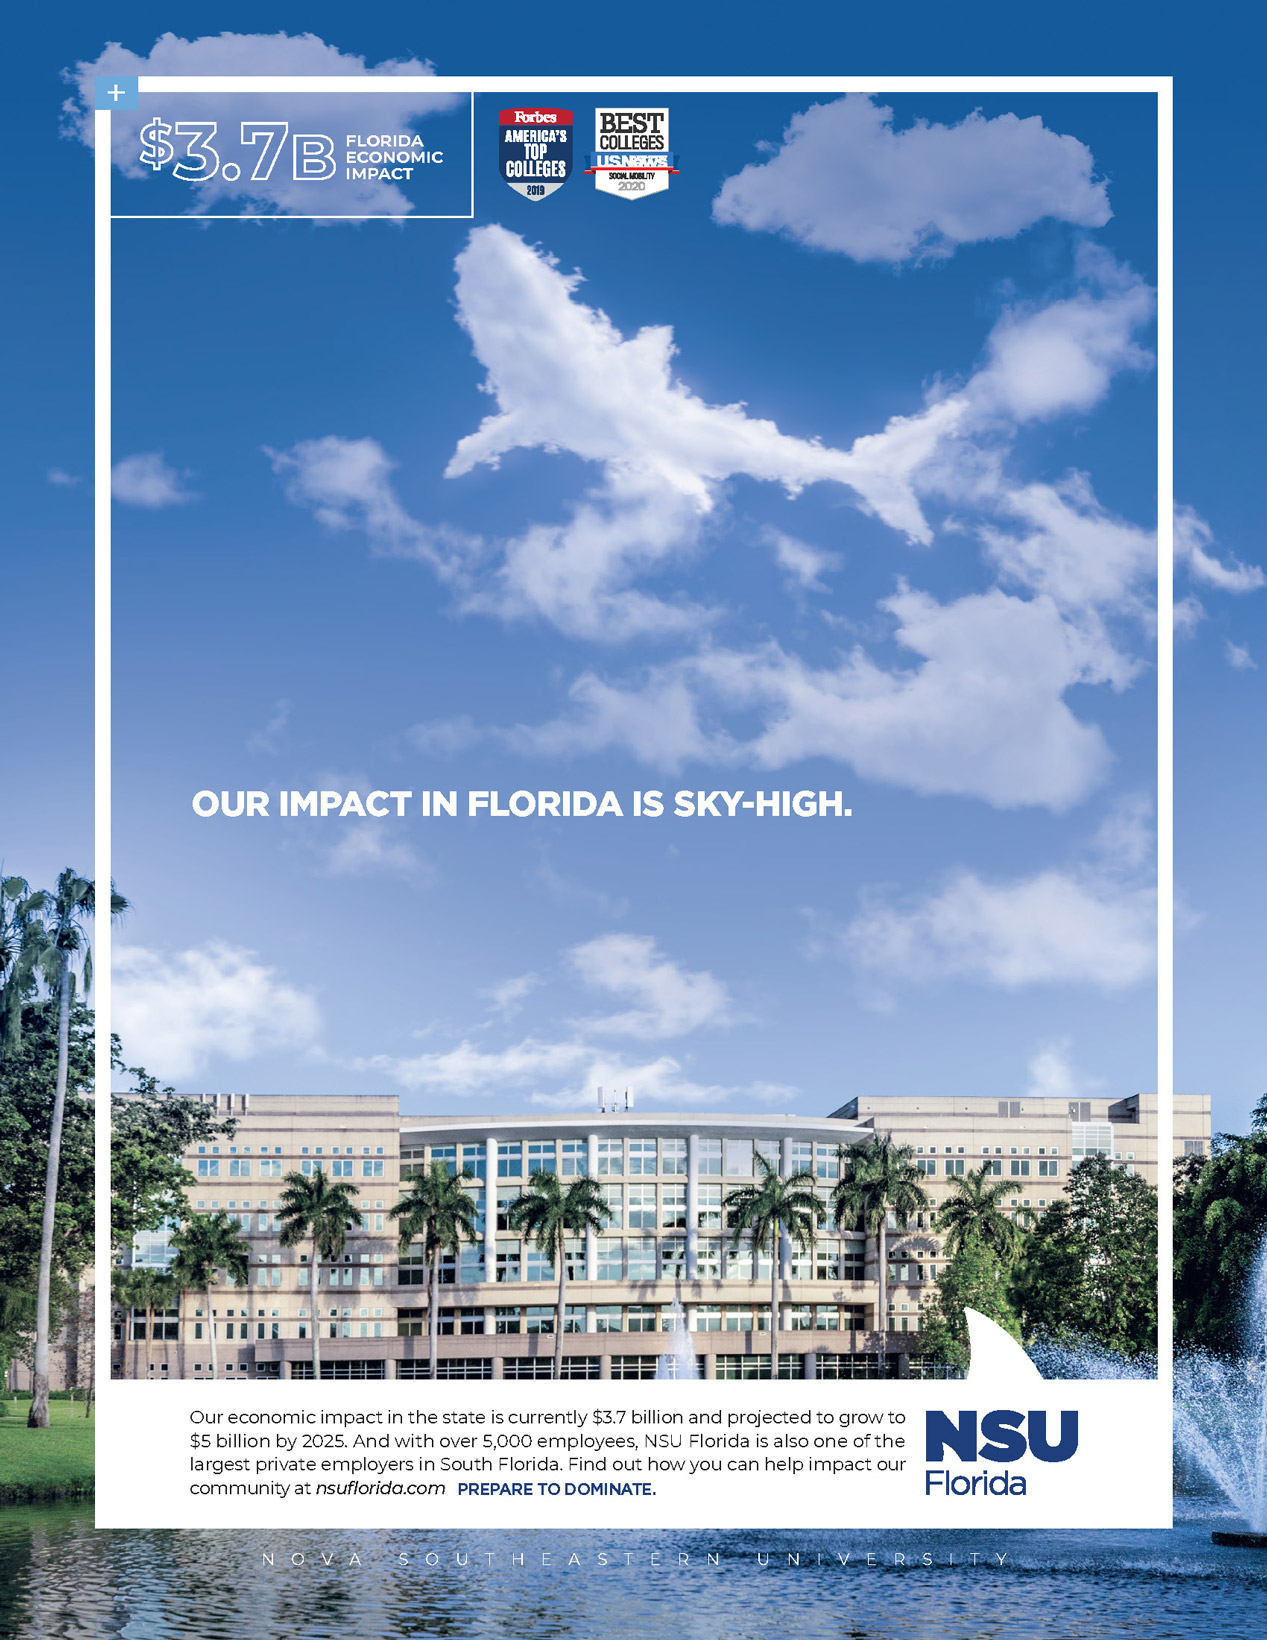 Our Impact In Florida is Sky-high